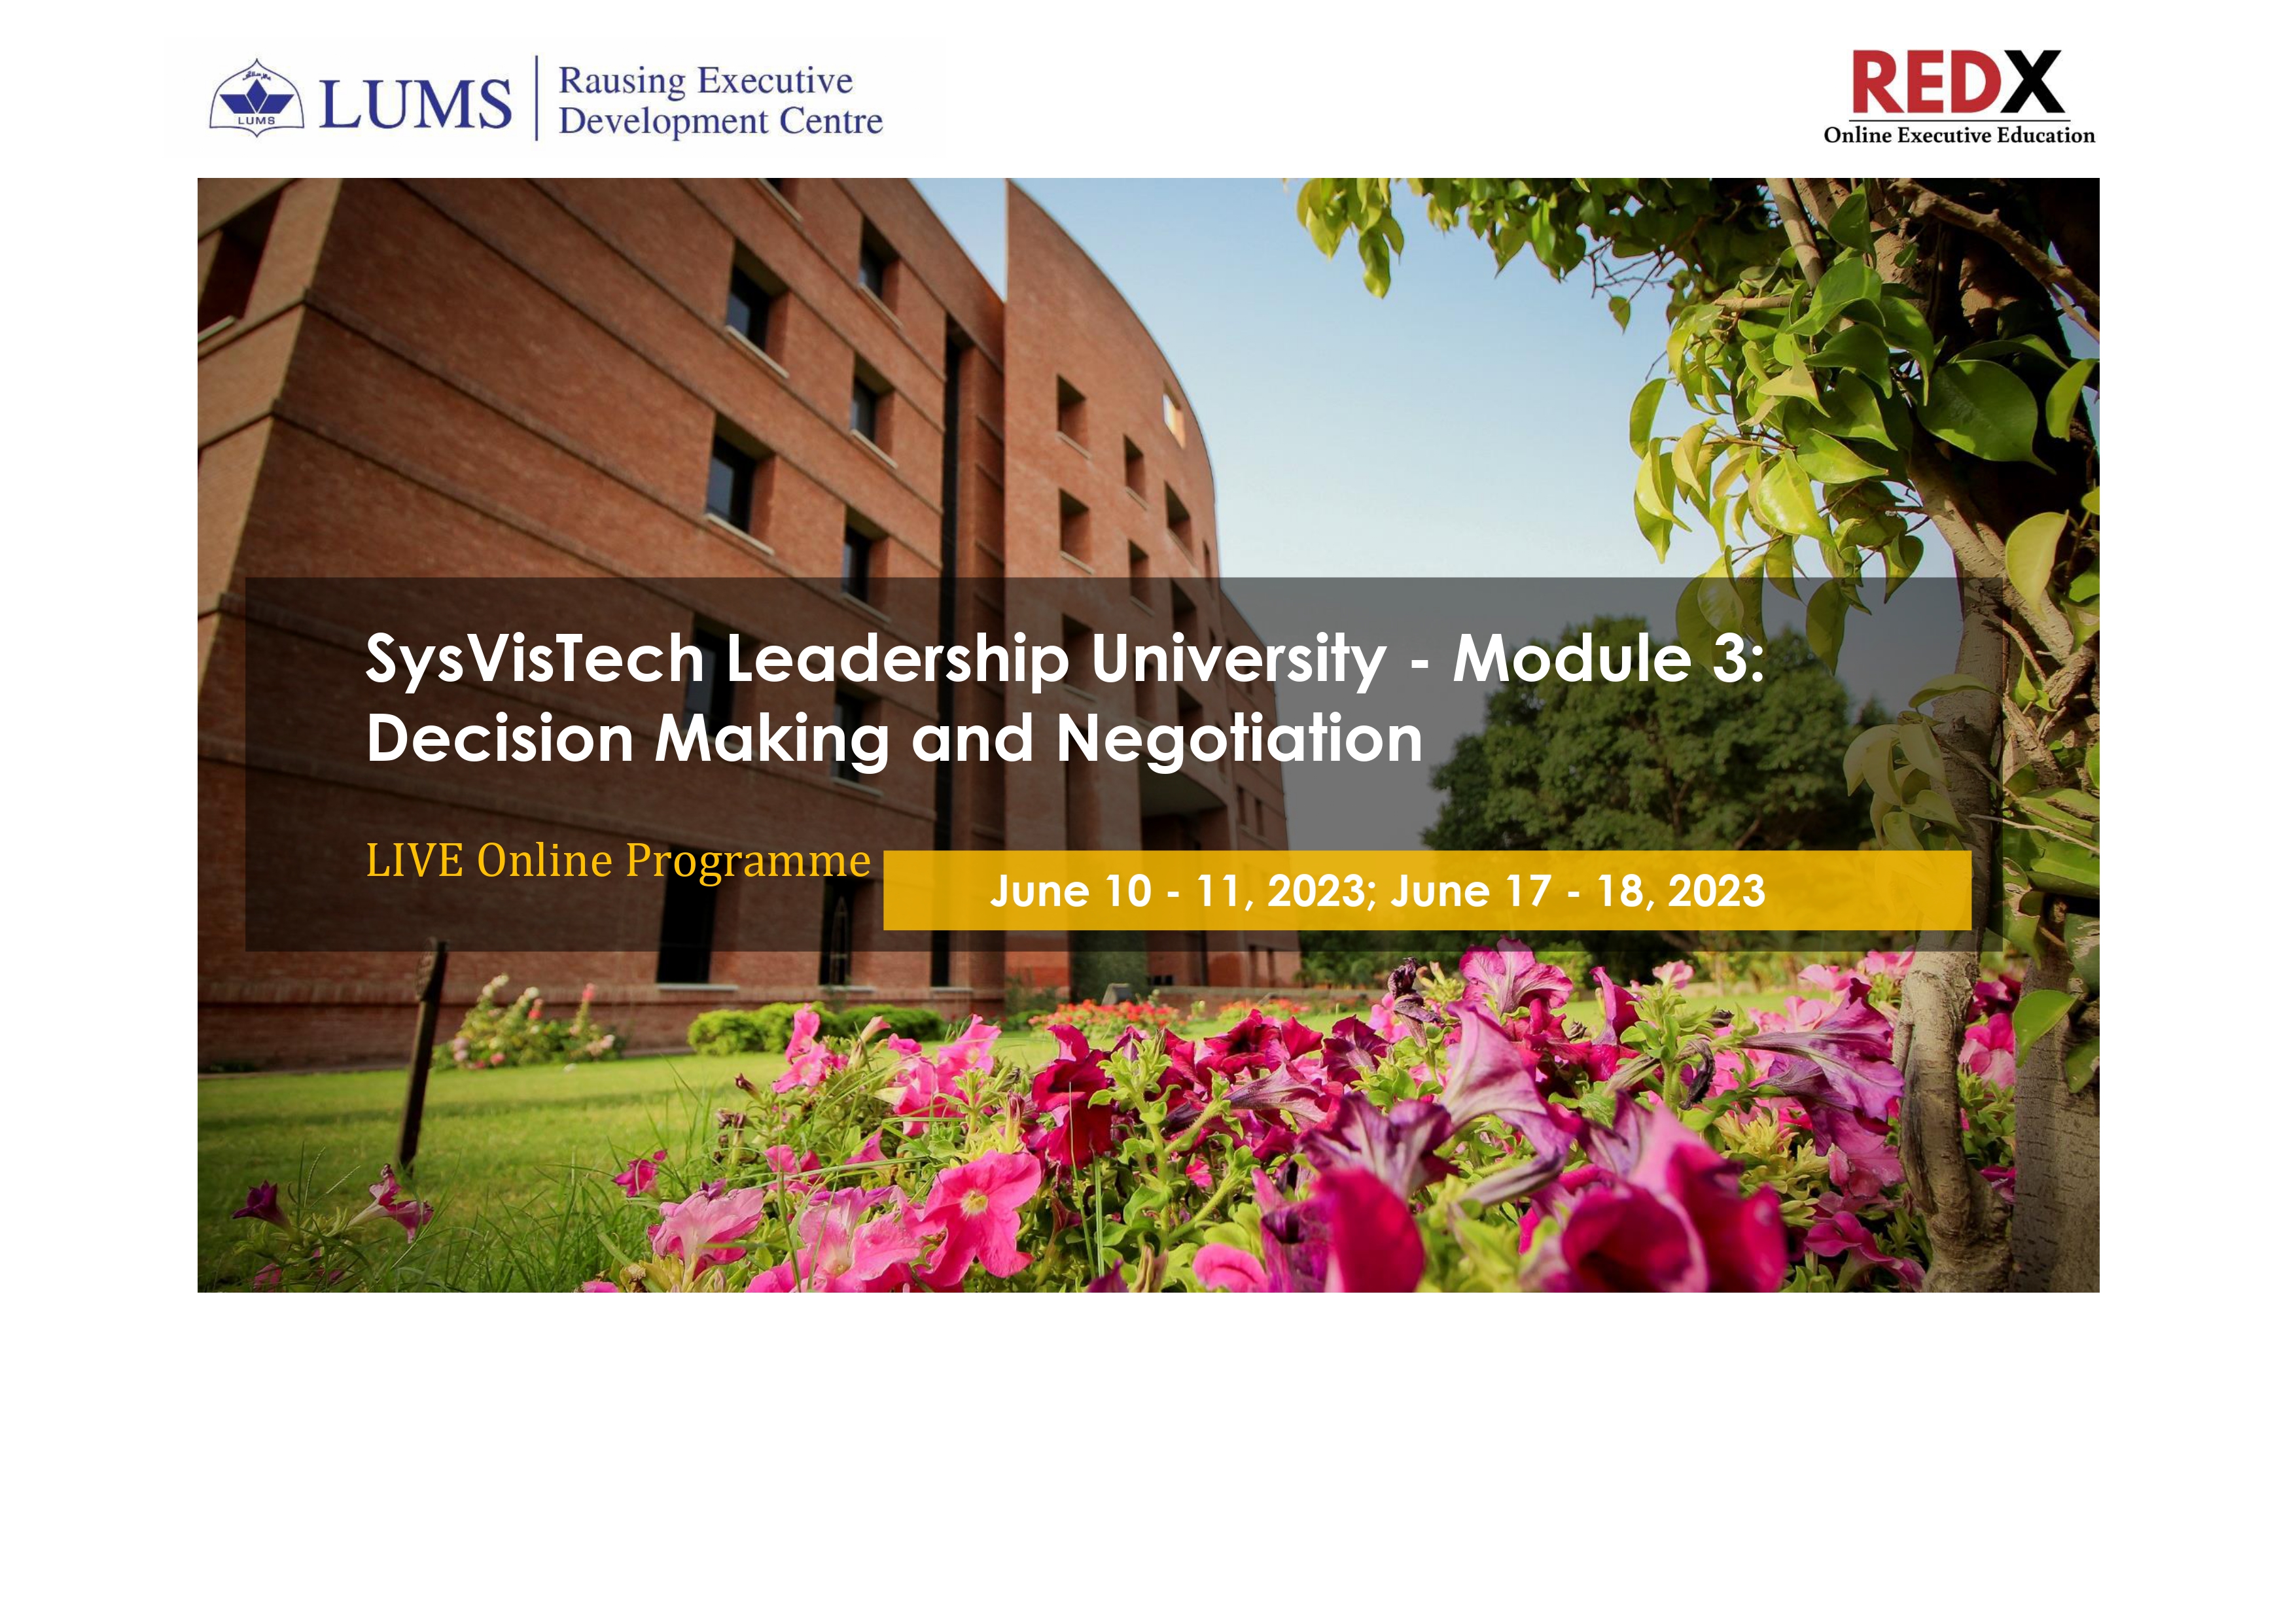 SysVisTech Leadership University - Module 3: Decision Making and Negotiation - Live Online